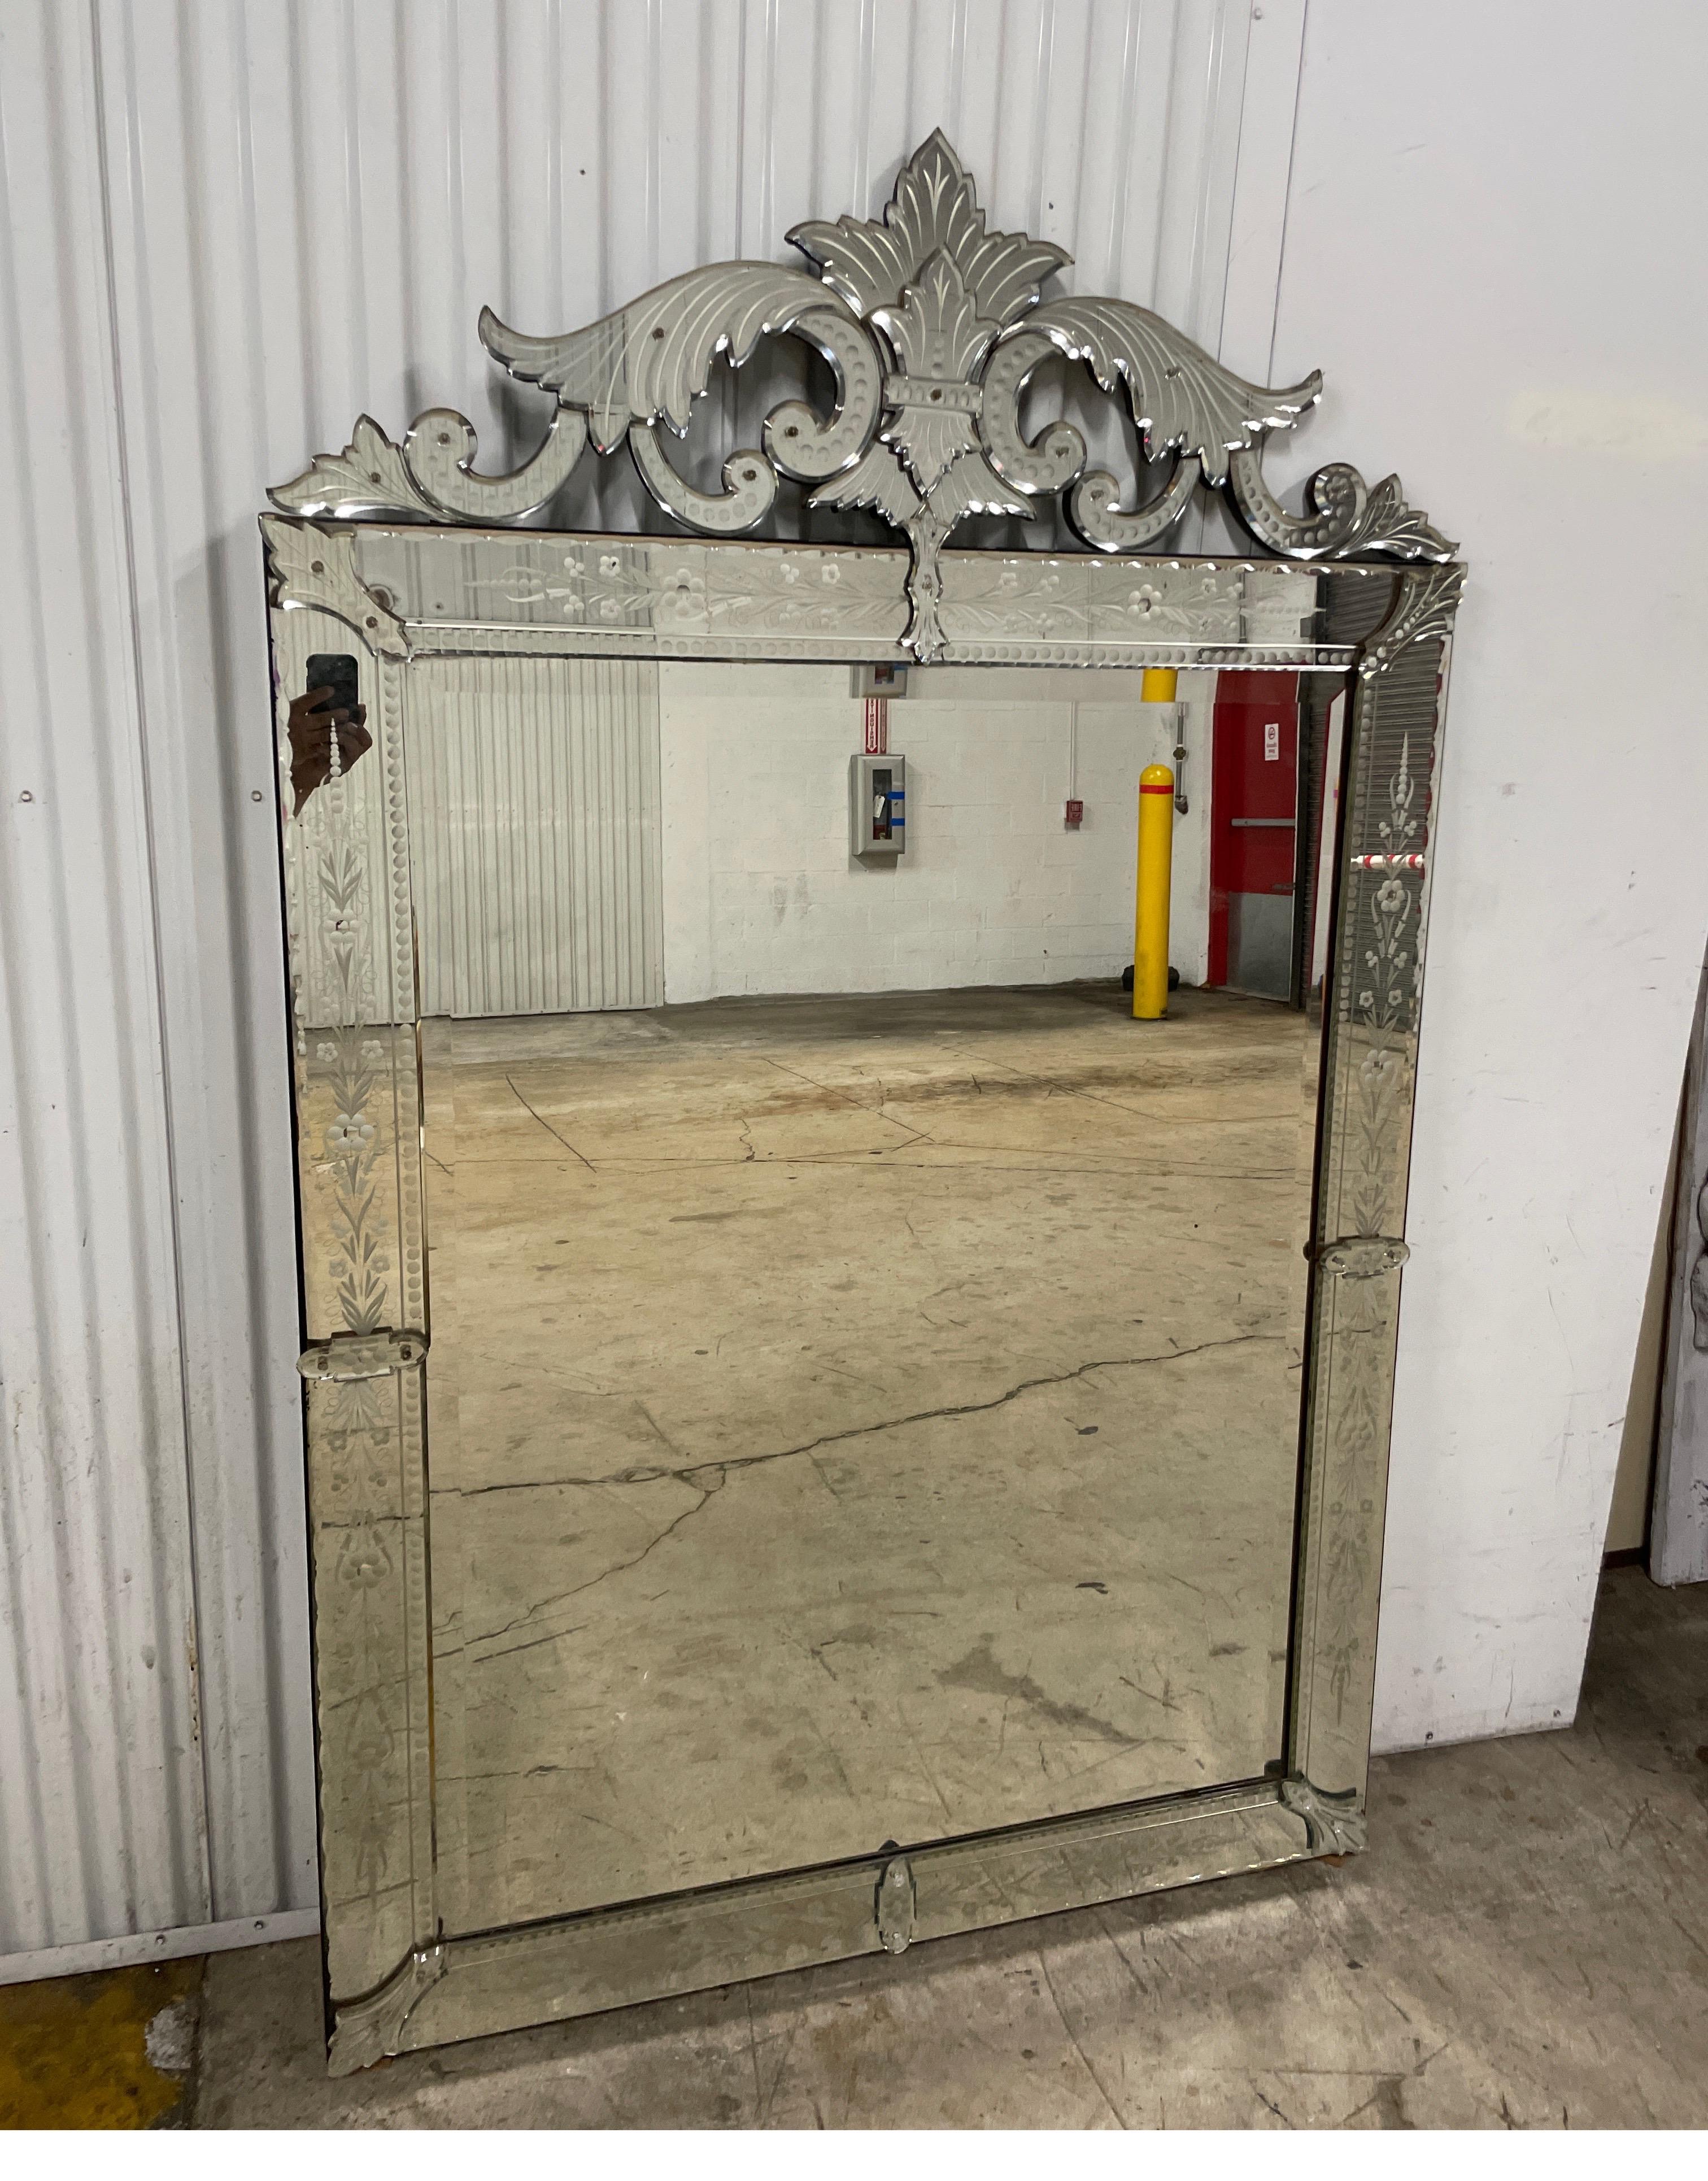 Large & elegant vintage Venetian mirror. The image really says it all. it is very stately and a true classic.  Will certainly add glamour to any setting.